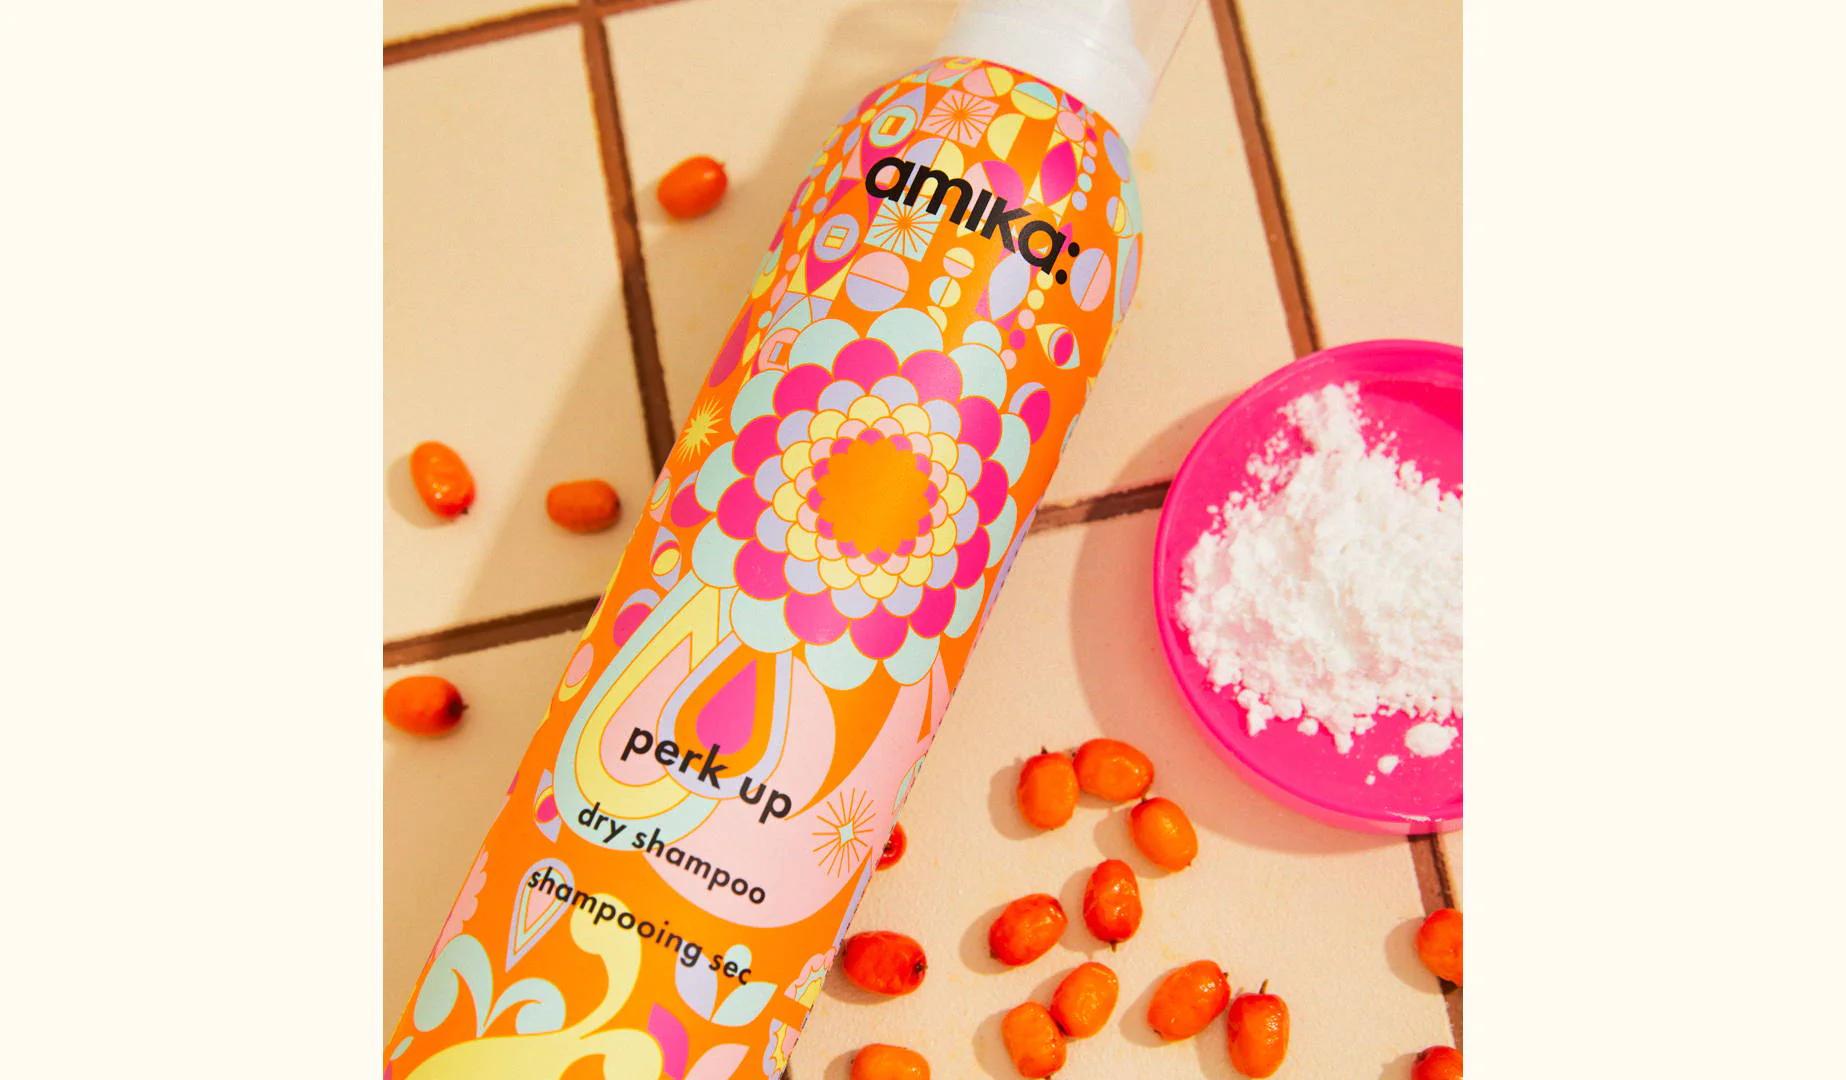 perk up dry shampoo surrounded by ingredients